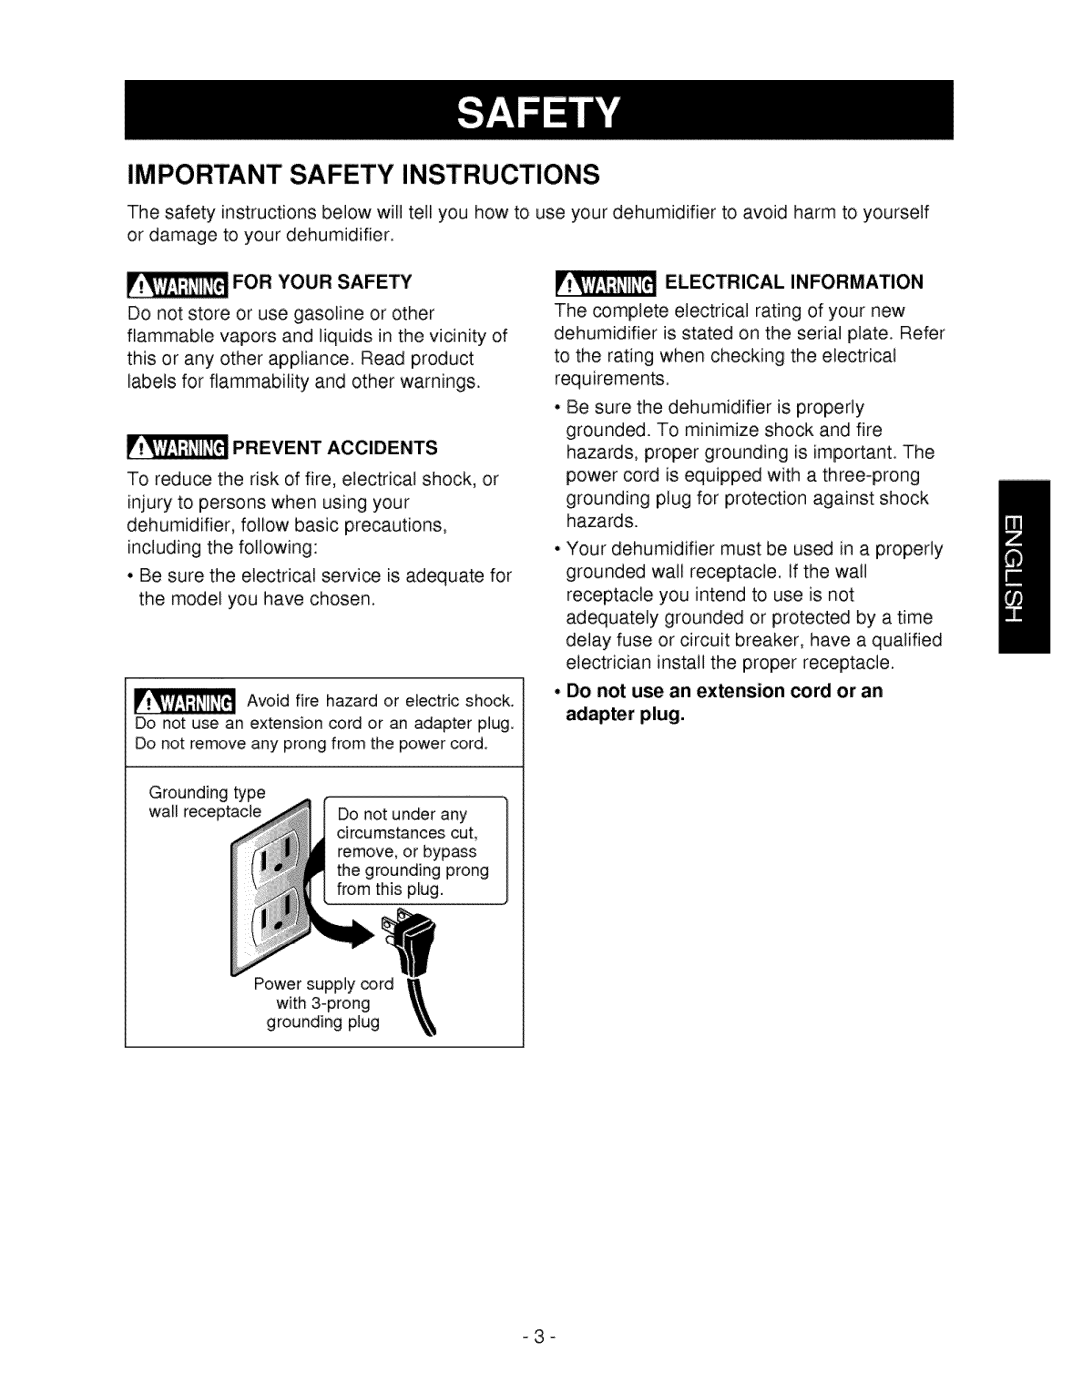 Kenmore 580.5245 owner manual Important Safety Instructions, For Your Safety, Prevent Accidents, Electrical Information 